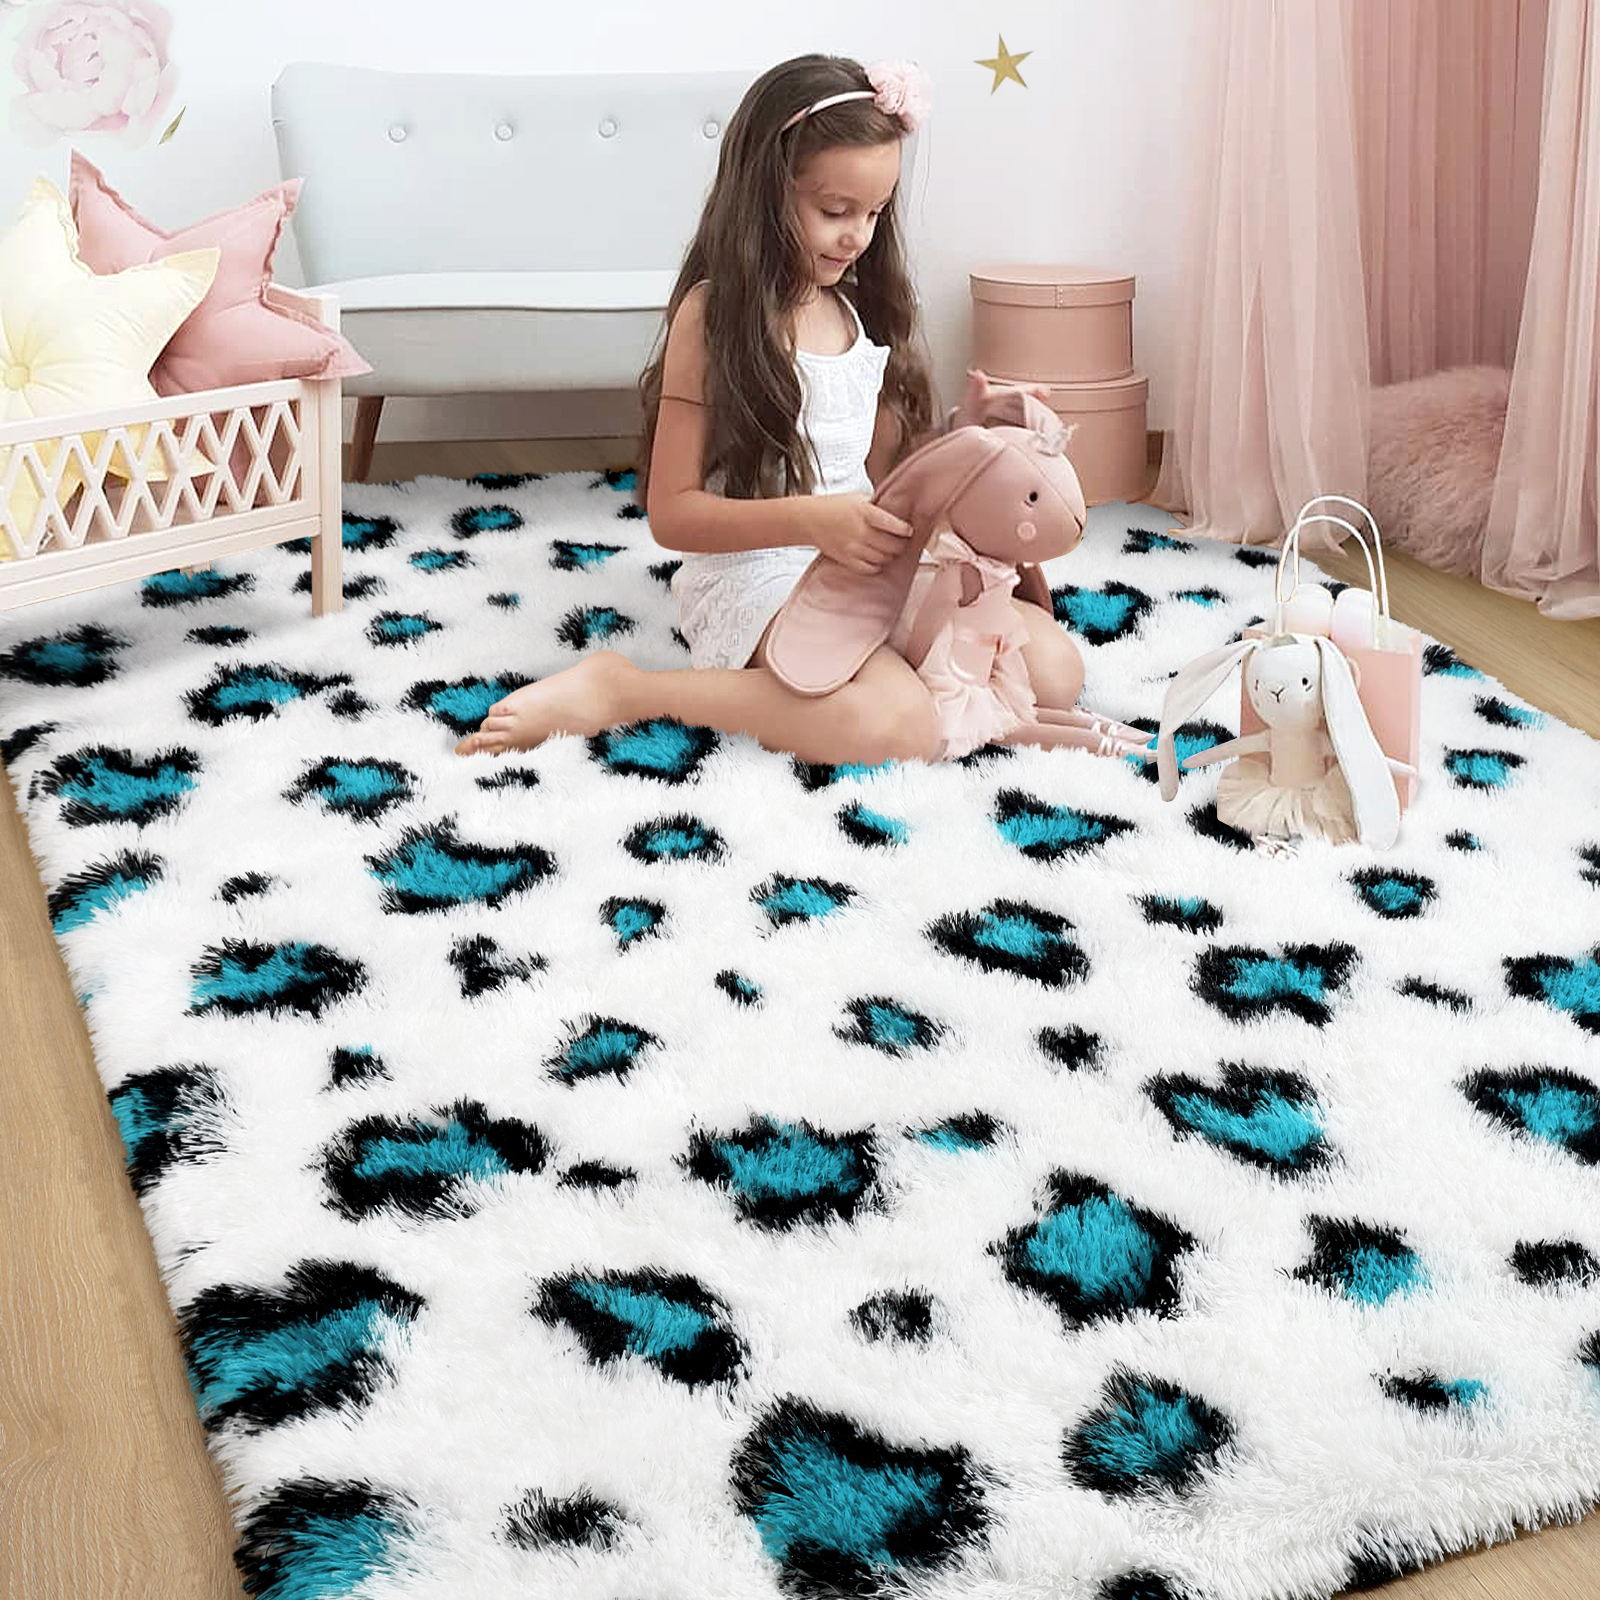 HOMORE Leopard Print Rugs, 3×5 Feet White/Teal Leopard Rug for